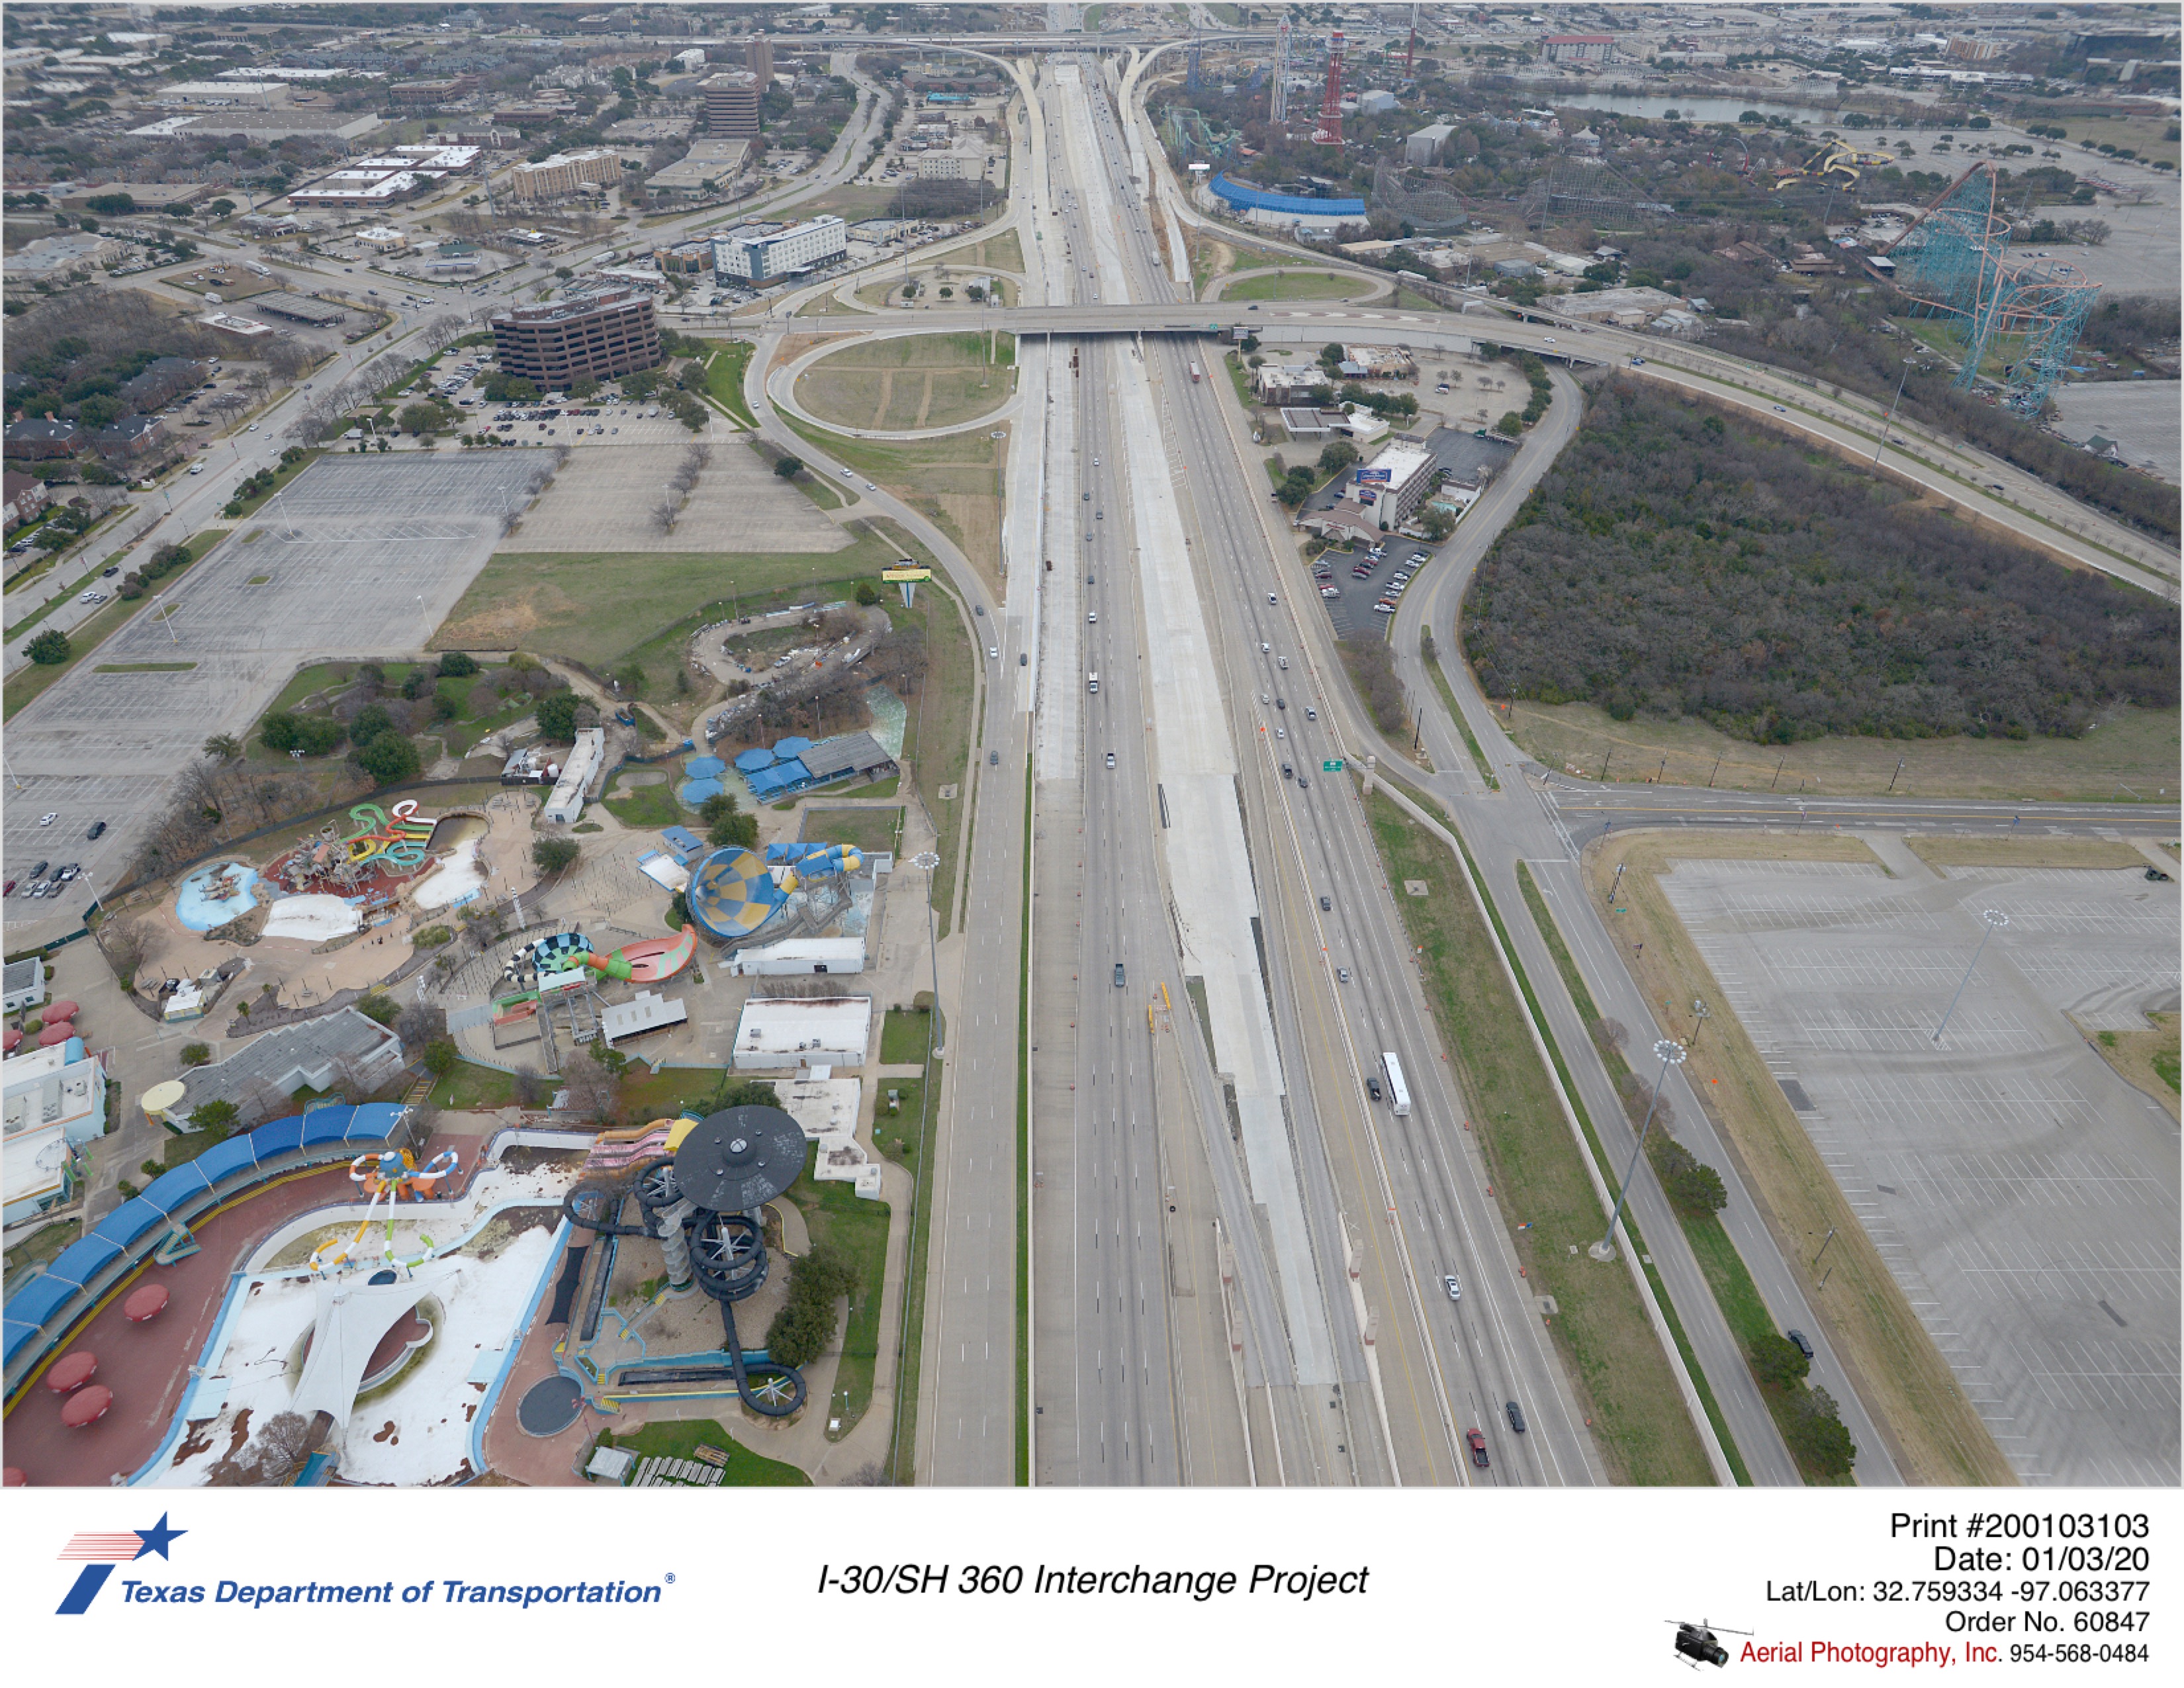 I-30 looking east over AT&T Way/Baird Farm Rd with Ballpark Way interchange in mid-ground. New pavement seen in median where managed lanes will be located.